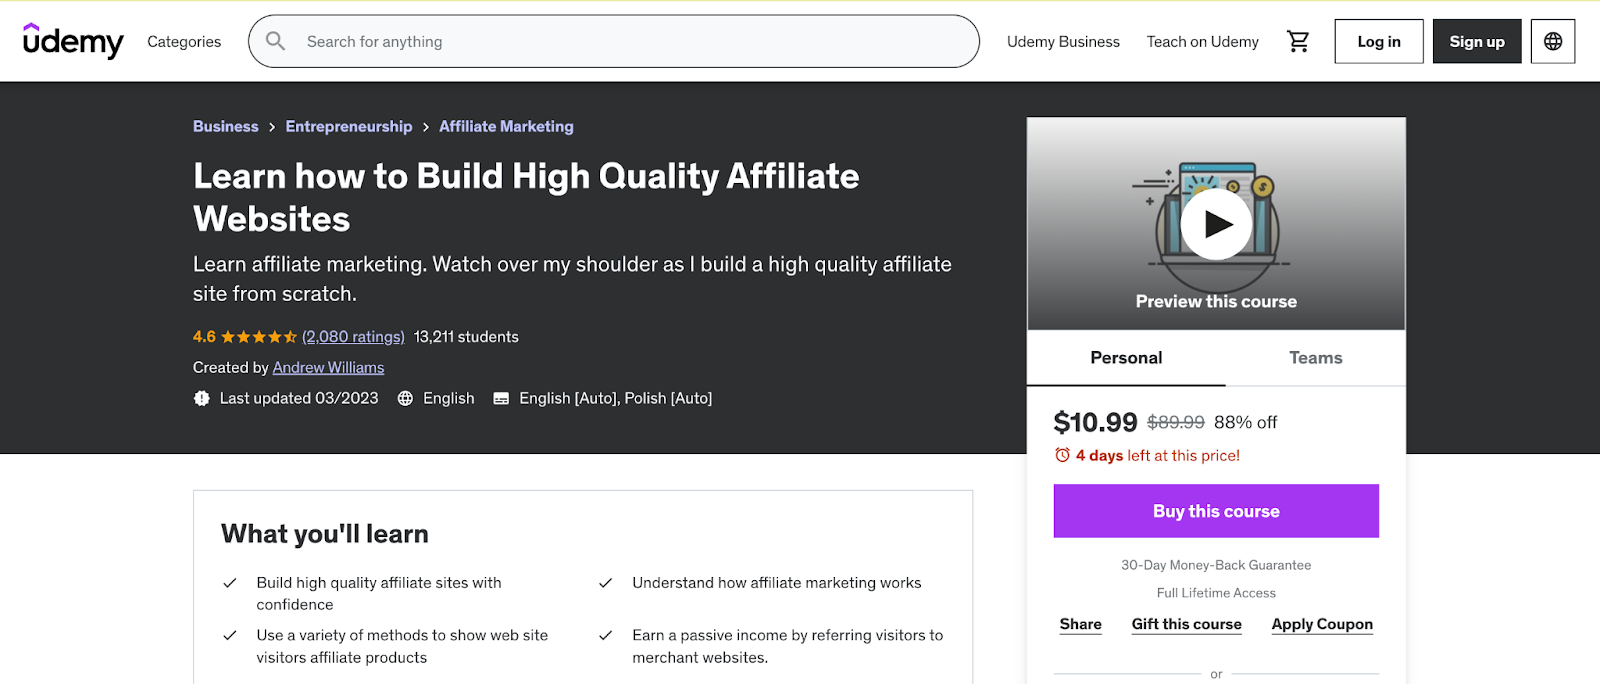 Learn how to Build High Quality Affiliate Websites course page on Udemy